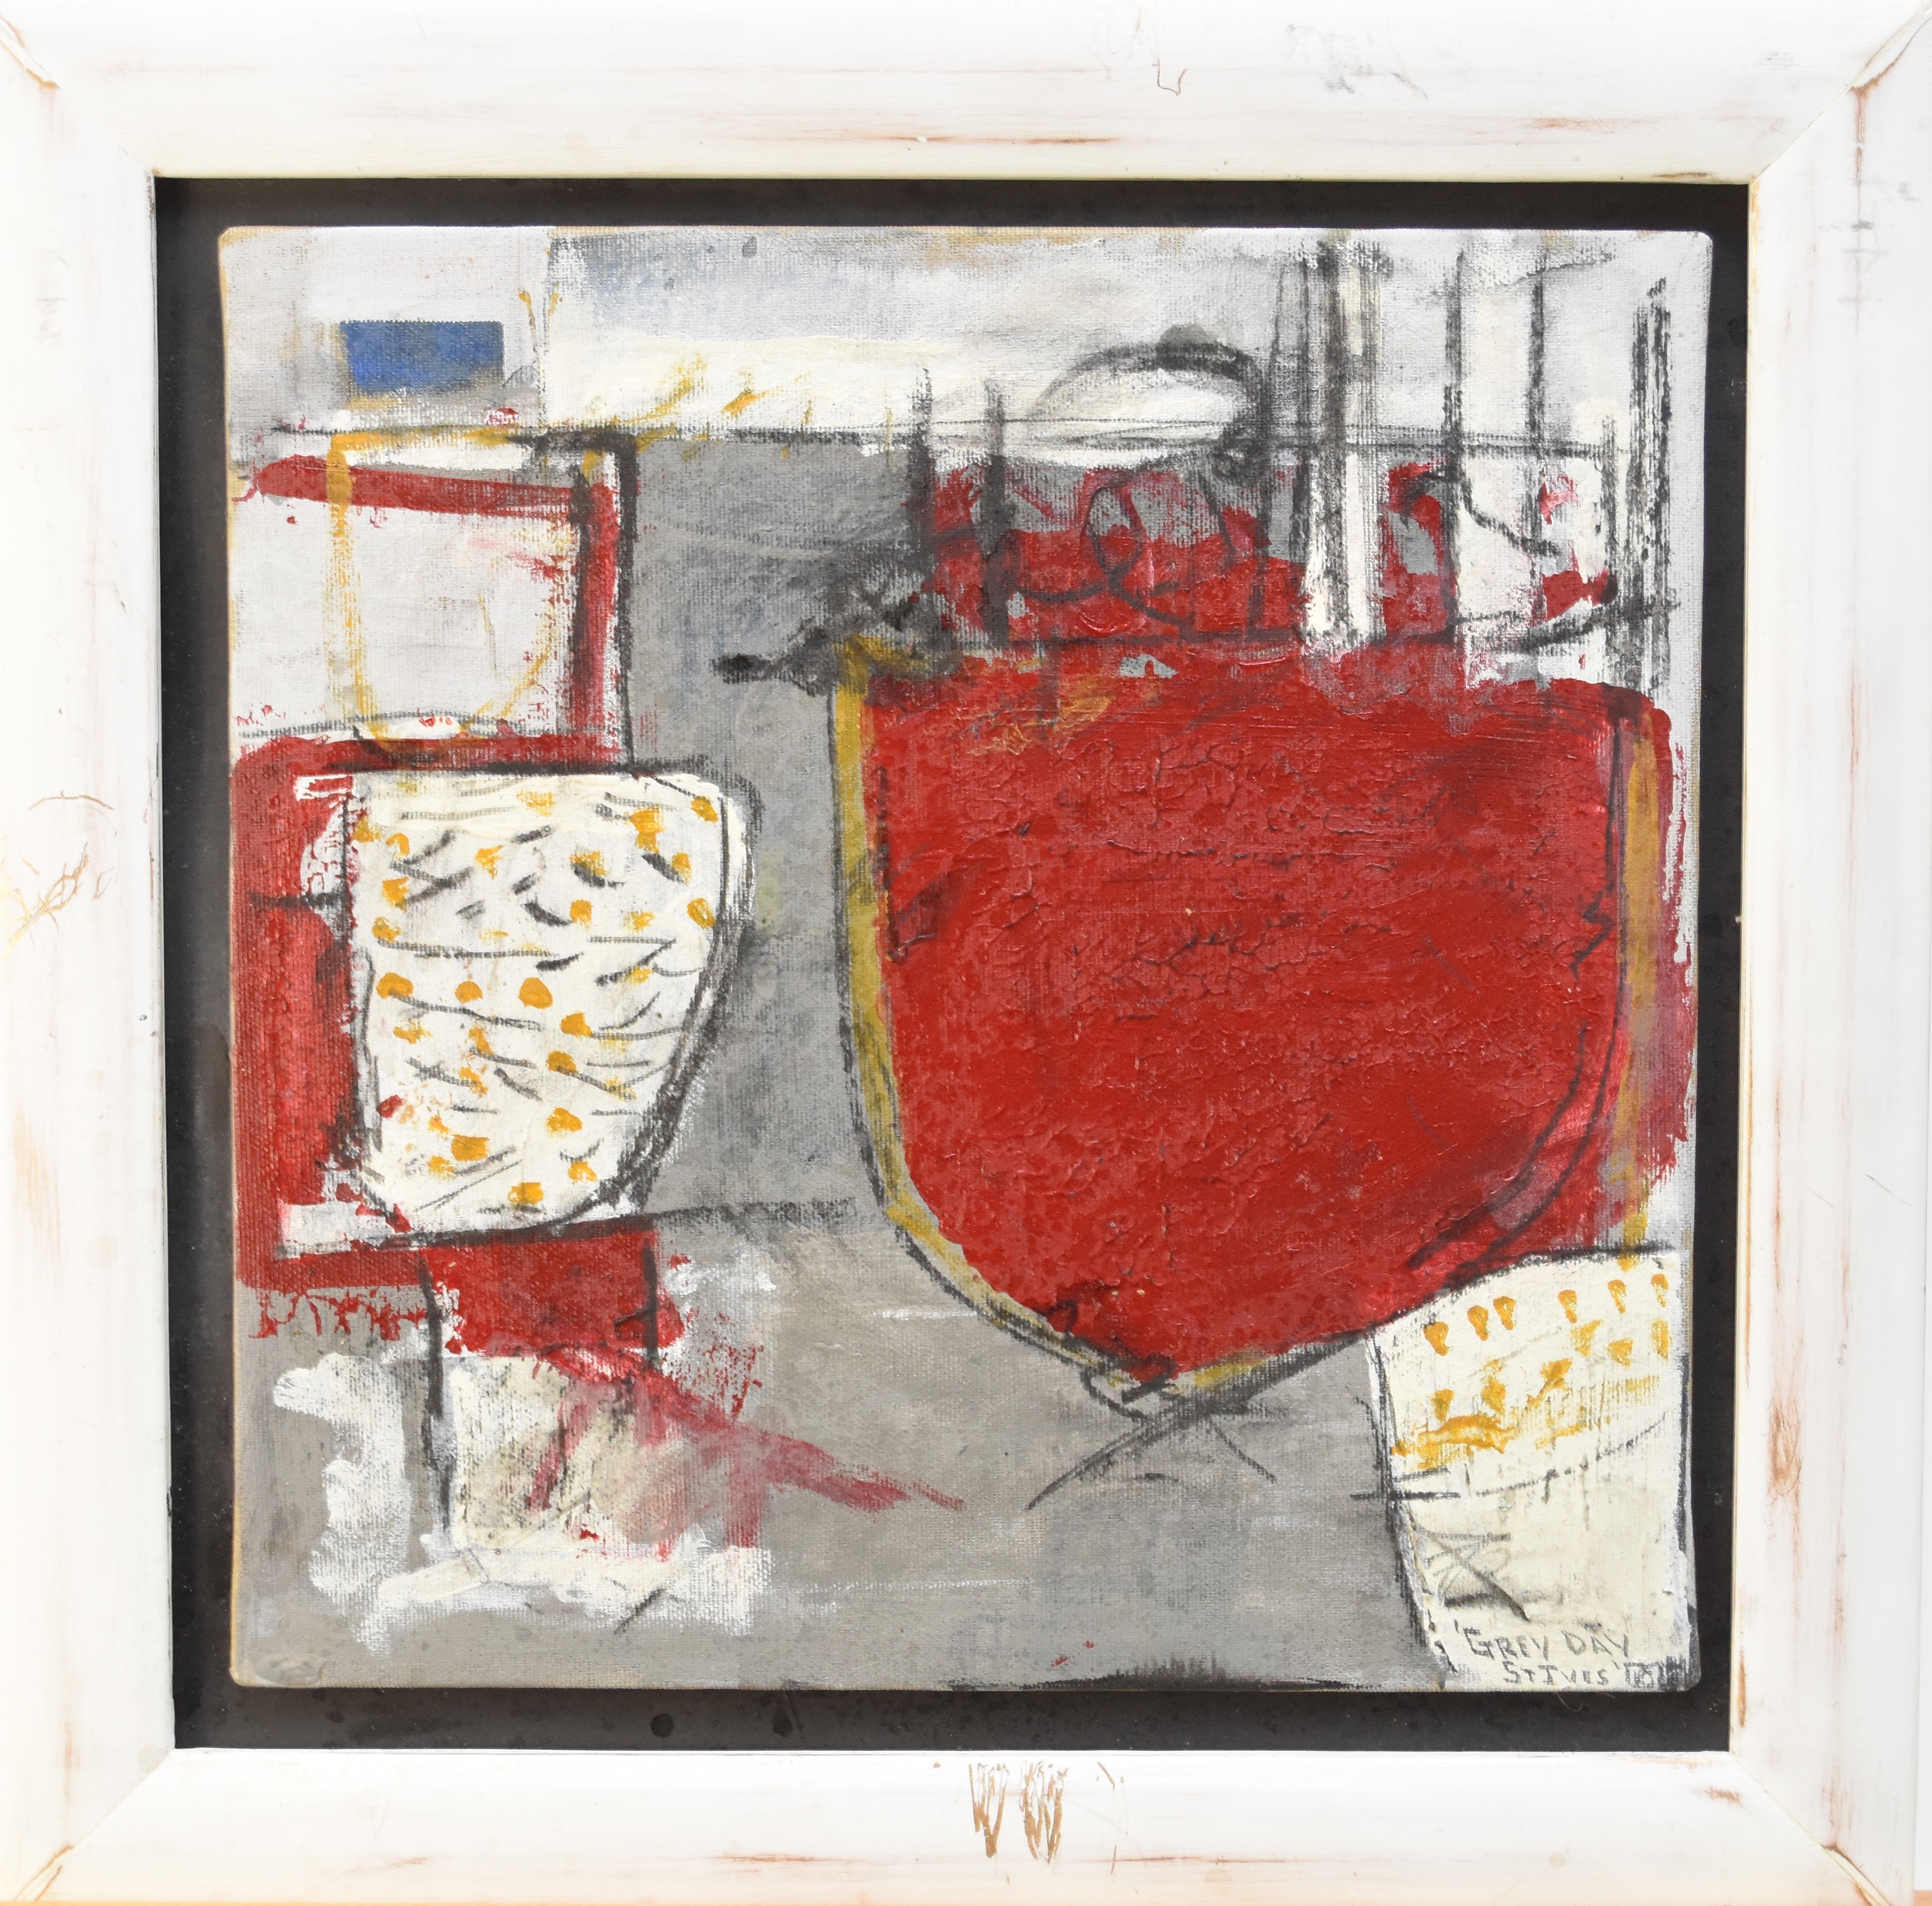 Cornish School (20th Century) Grey Day with Red Boat, St. Ives, titled lower right, oil on canvas - Image 2 of 4